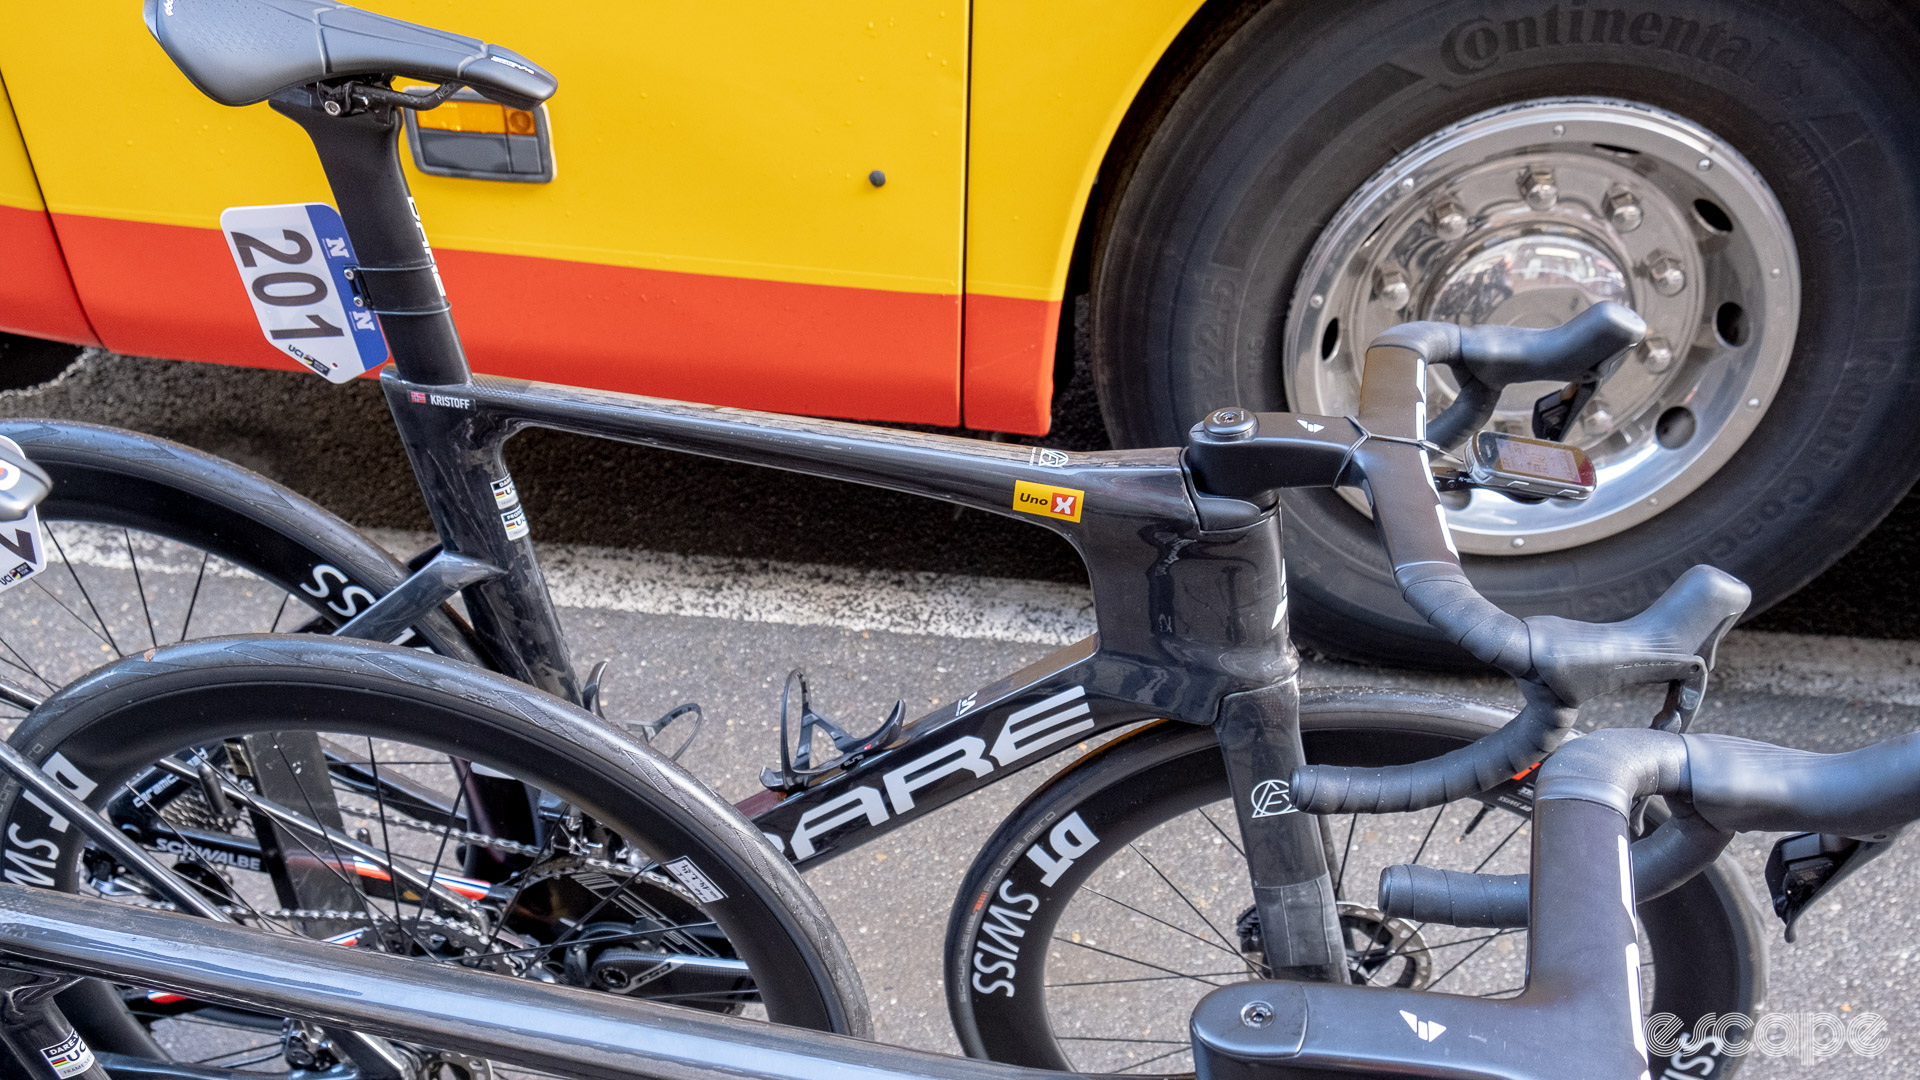 The image shows Alexander Kristoff's new Dare prototype aero bike on a bike rack with some existing Dare bikes outside the Uno X team bus. 